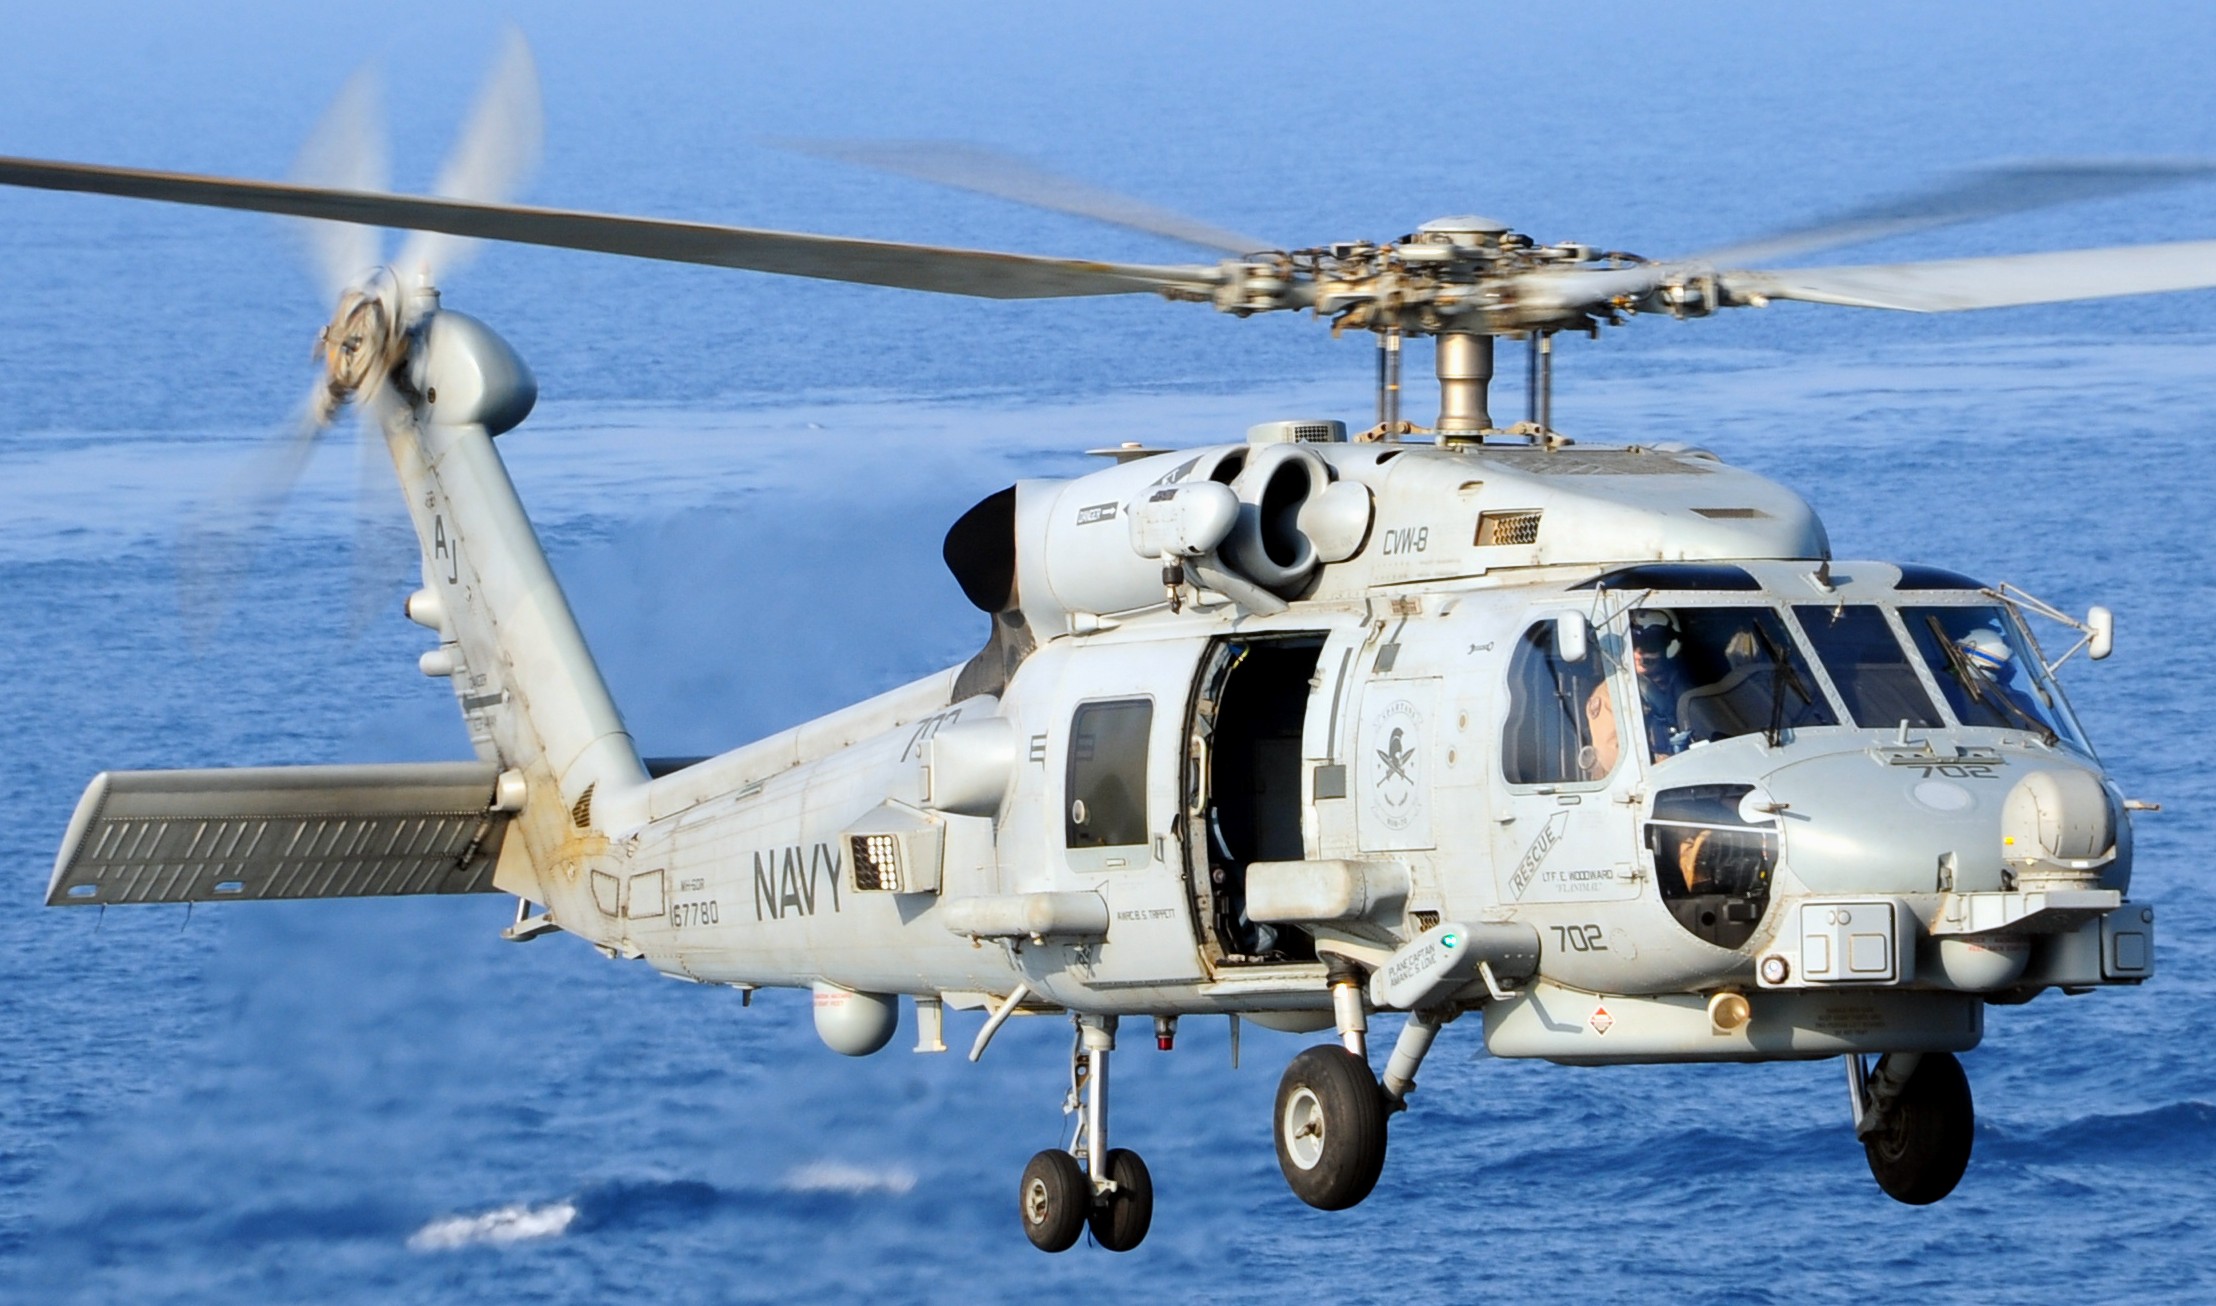 hsm-70 spartans helicopter maritime strike squadron sikorsky mh-60r seahawk navy nas jacksonville